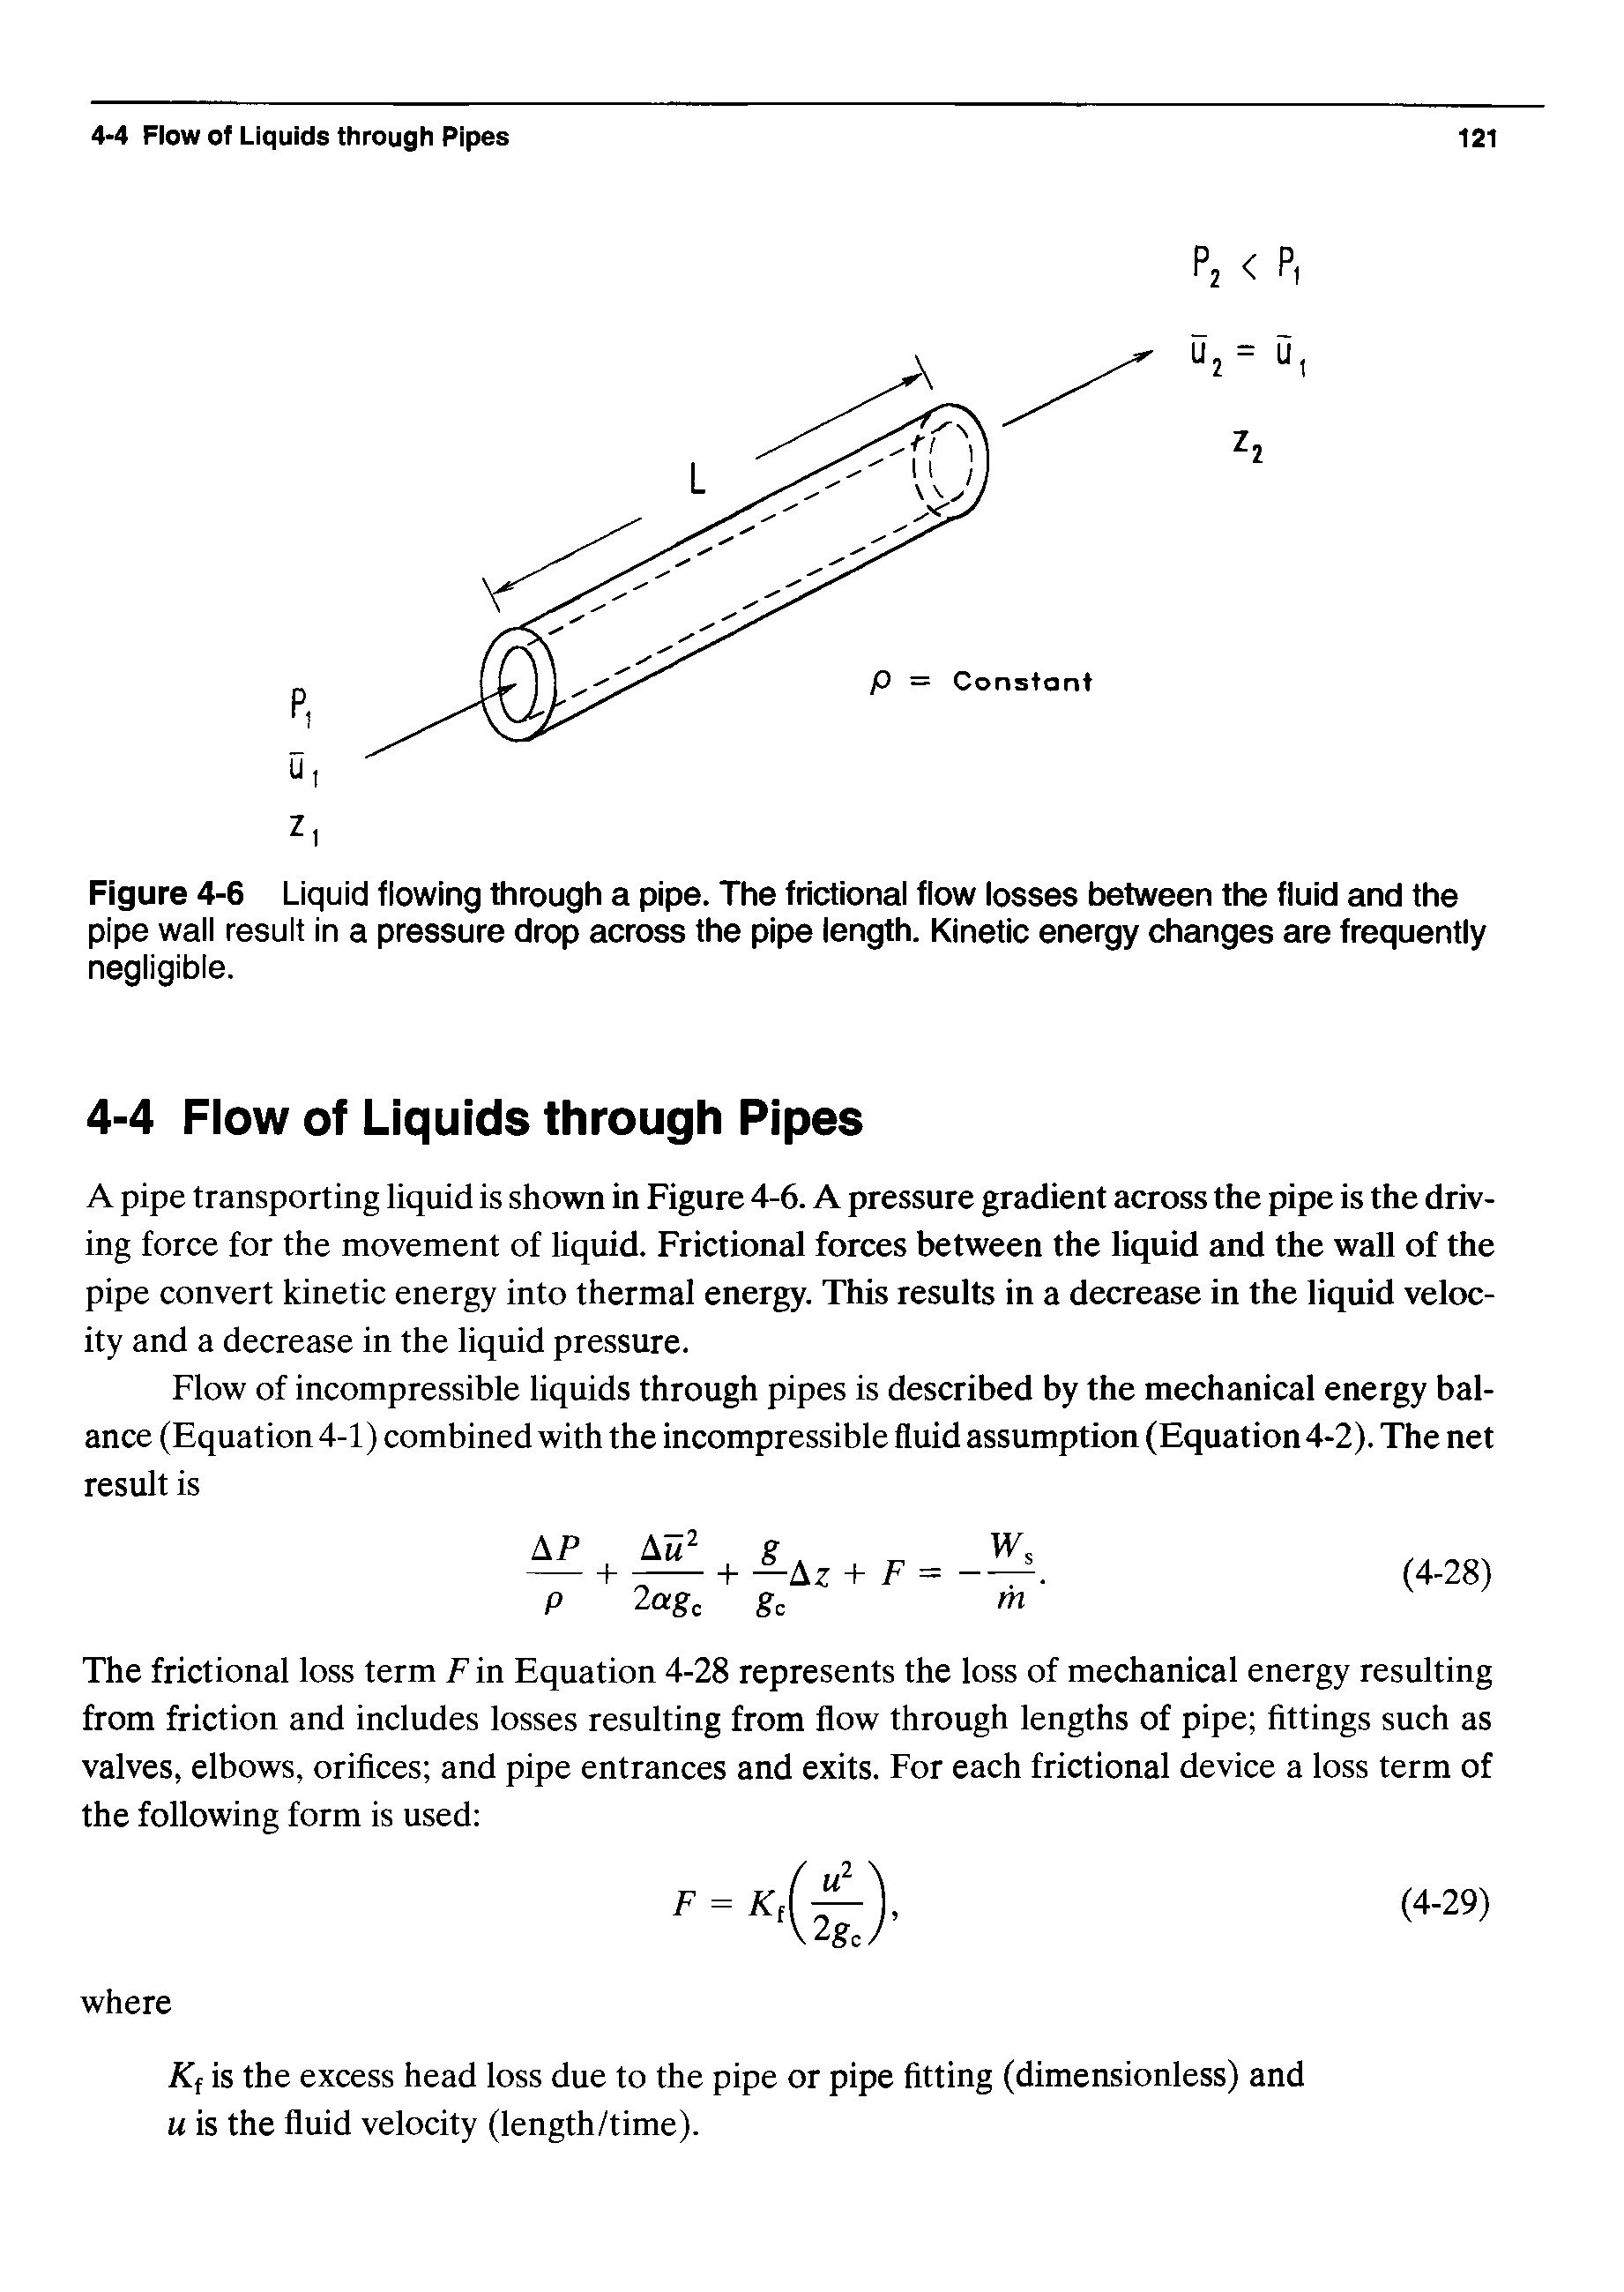 Figure 4-6 Liquid flowing through a pipe. The frictional flow losses between the fluid and the pipe wall result in a pressure drop across the pipe length. Kinetic energy changes are frequently negligible.